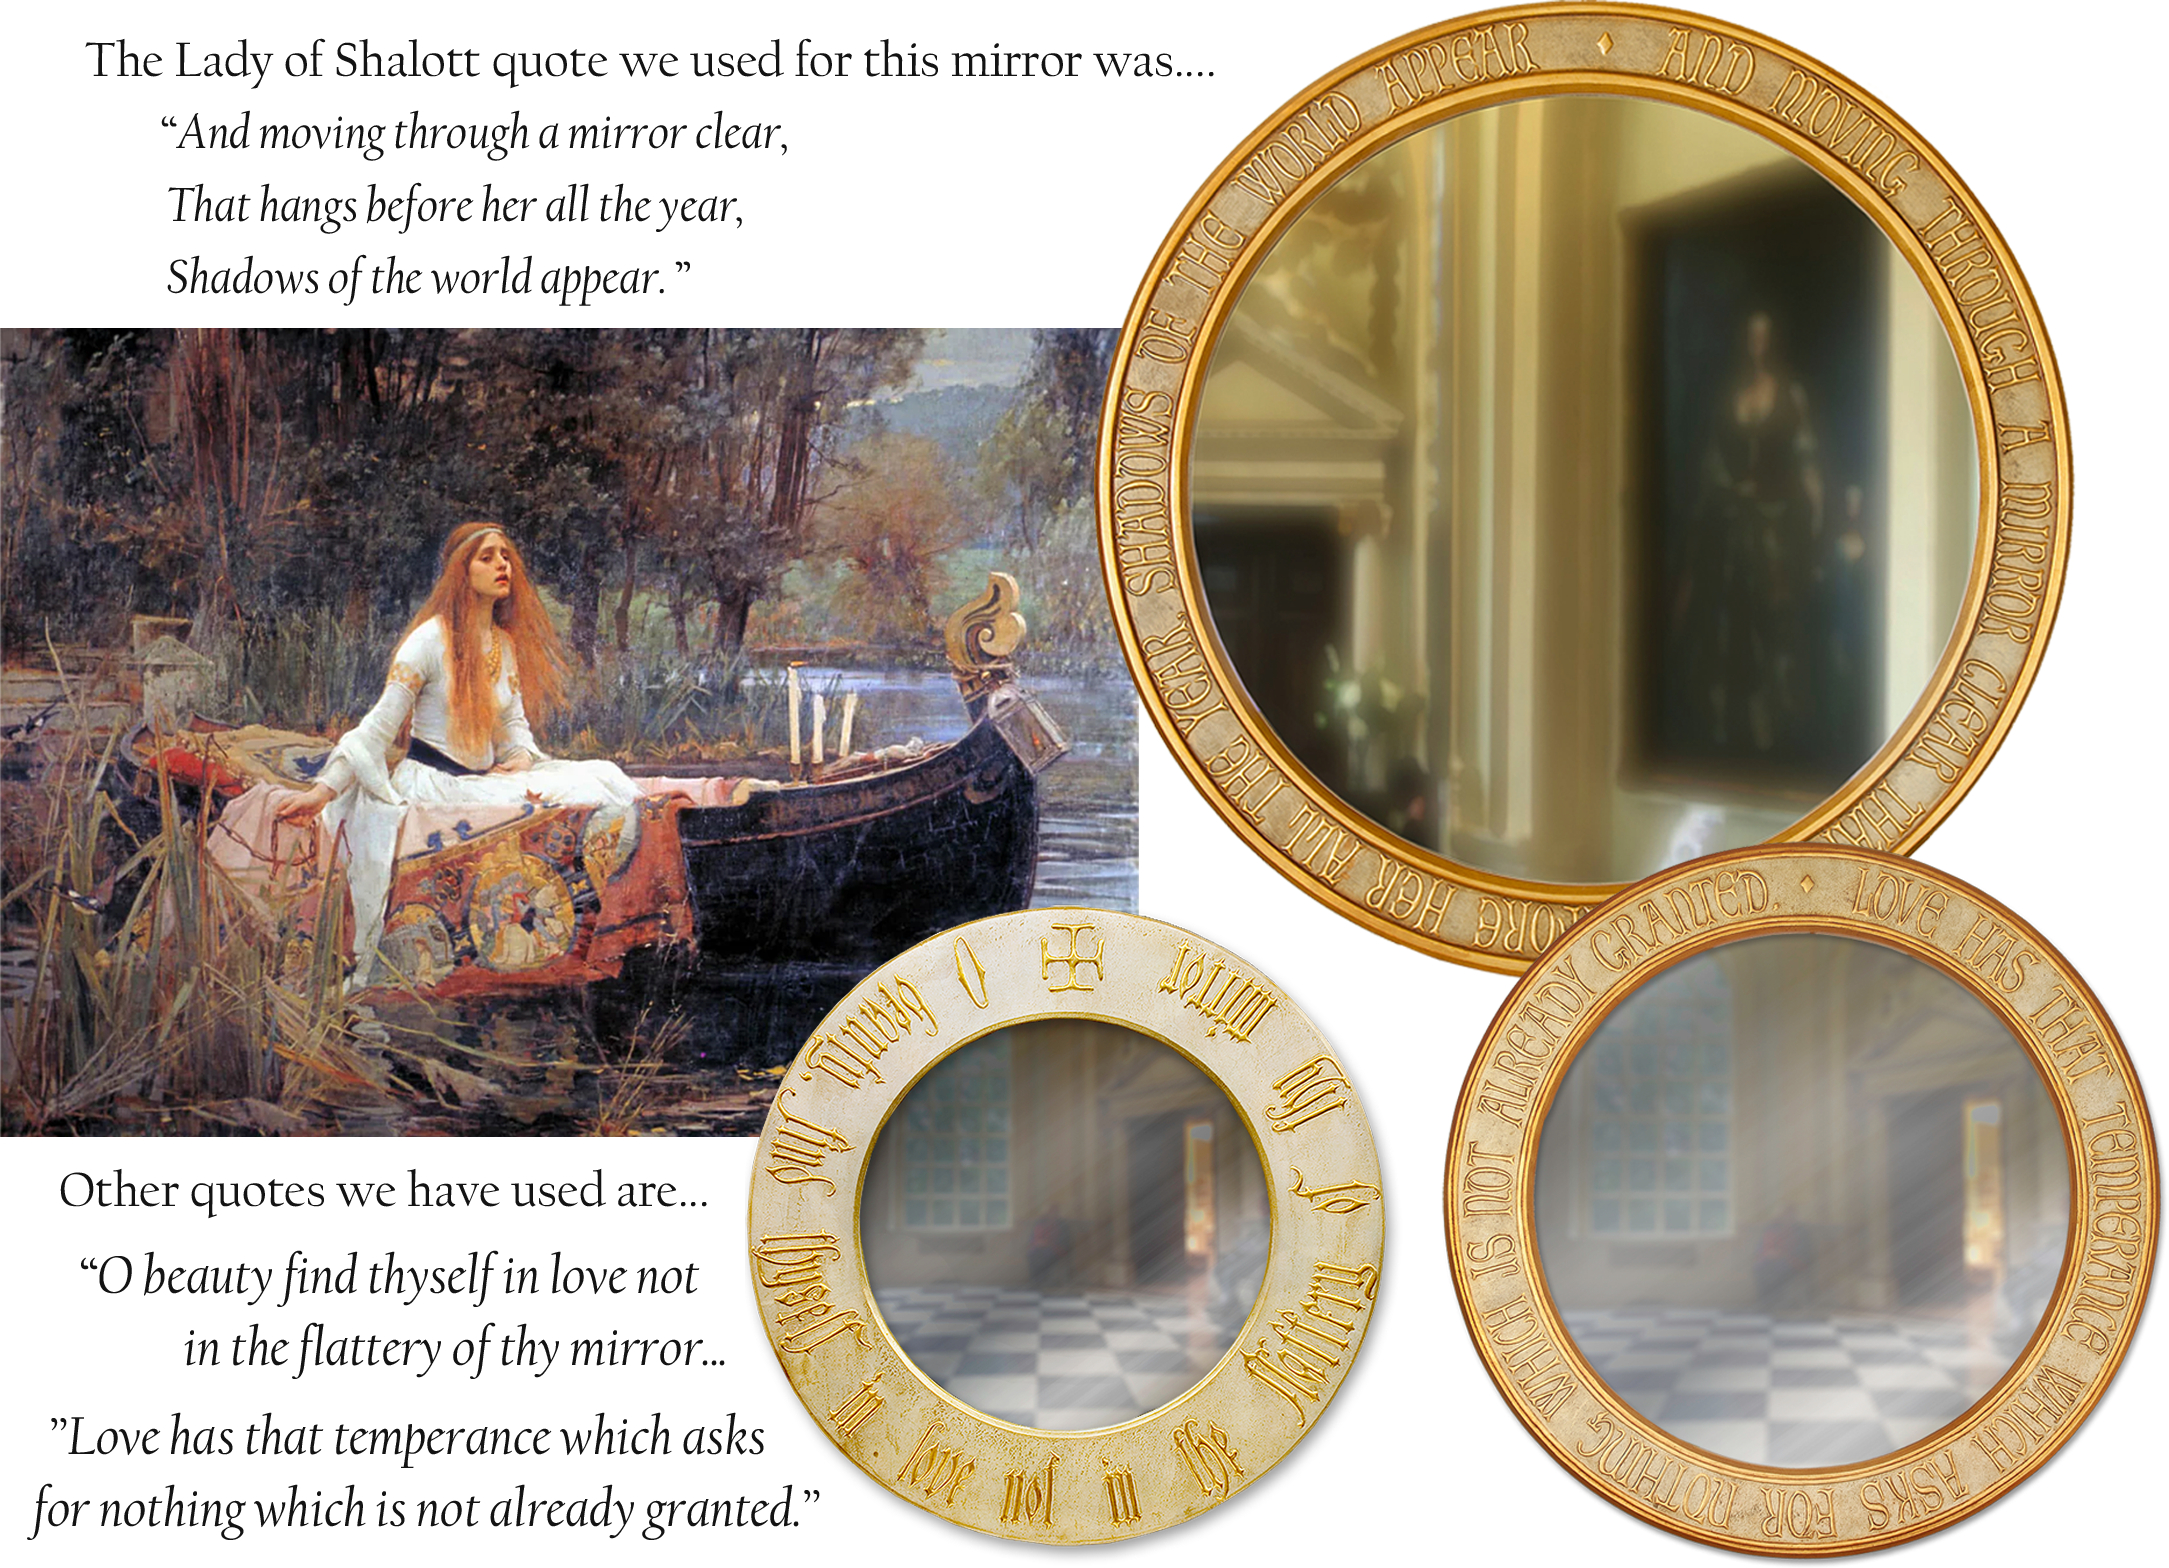 Large medium and small sized gold and silver mirrors with quotes in gold script